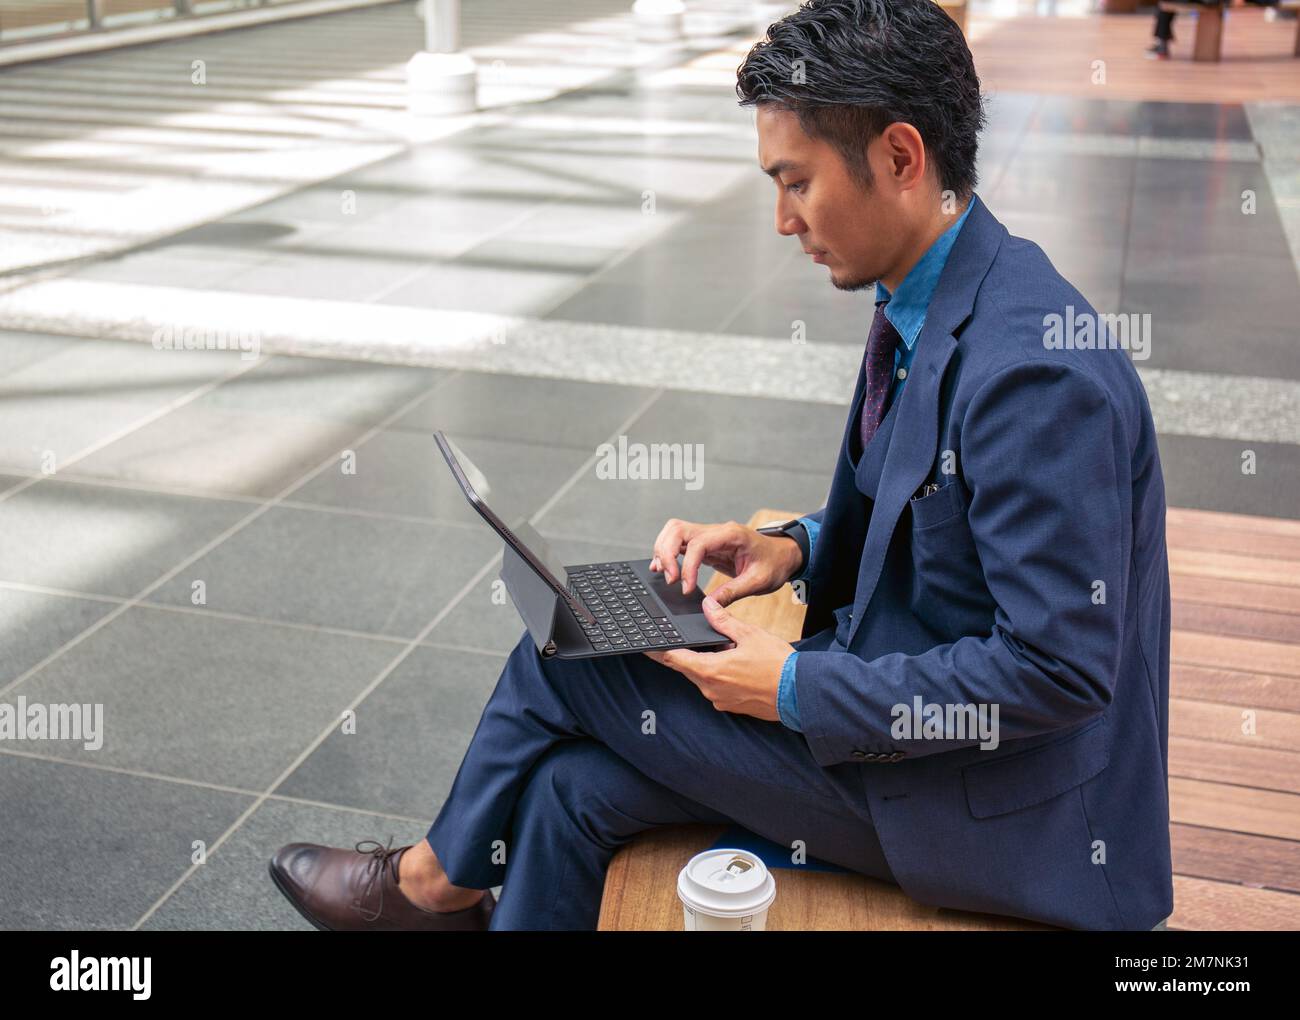 A young businessman in a blue suit on the move in a city downtown area, sitting on a bench using a digital tablet. Stock Photo